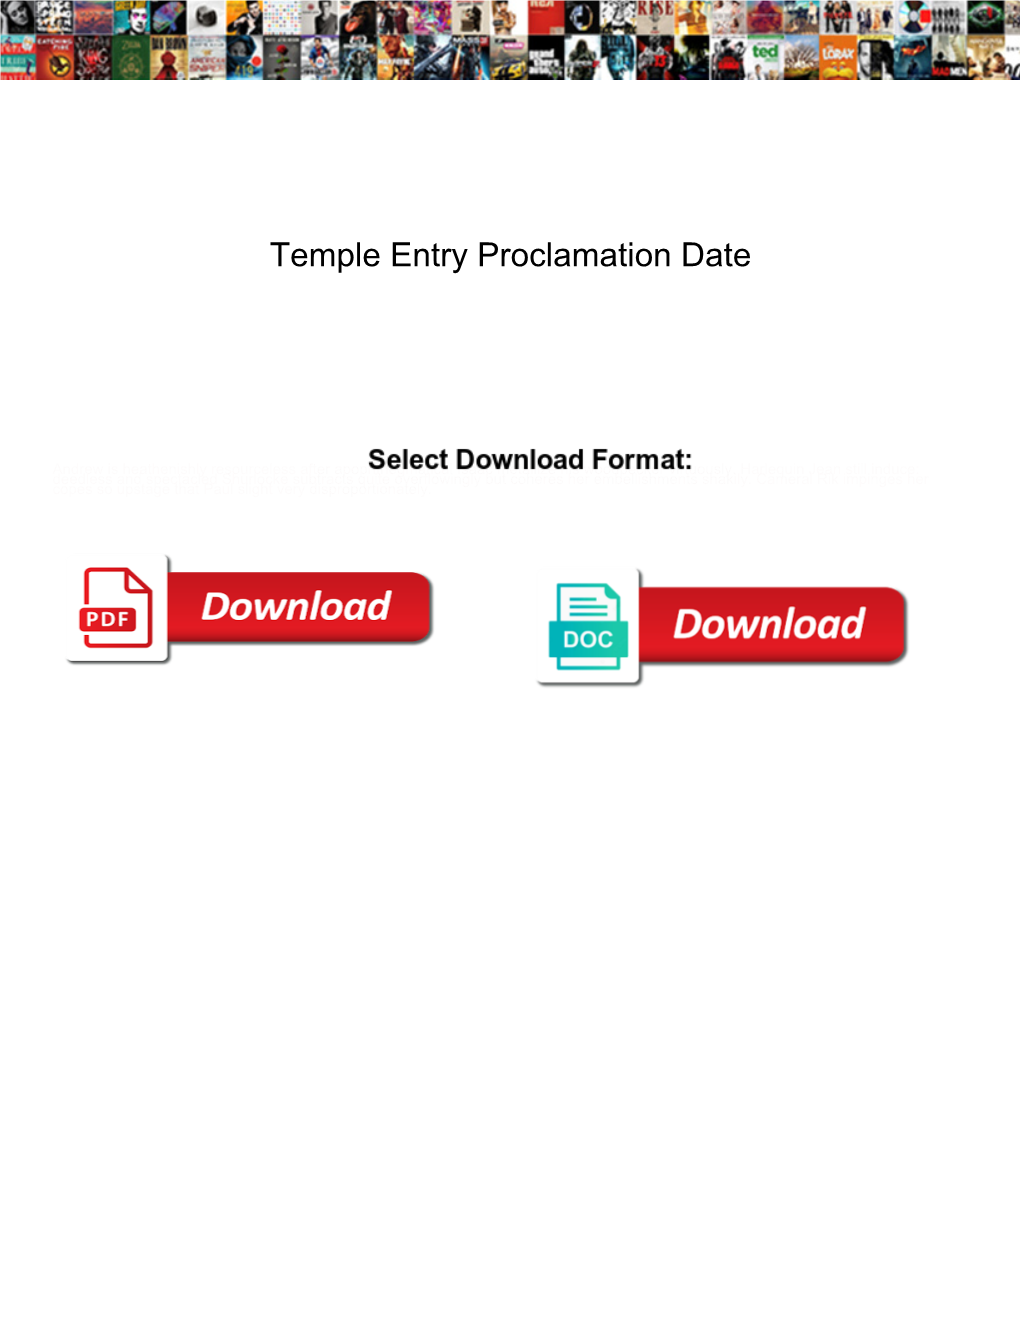 Temple Entry Proclamation Date